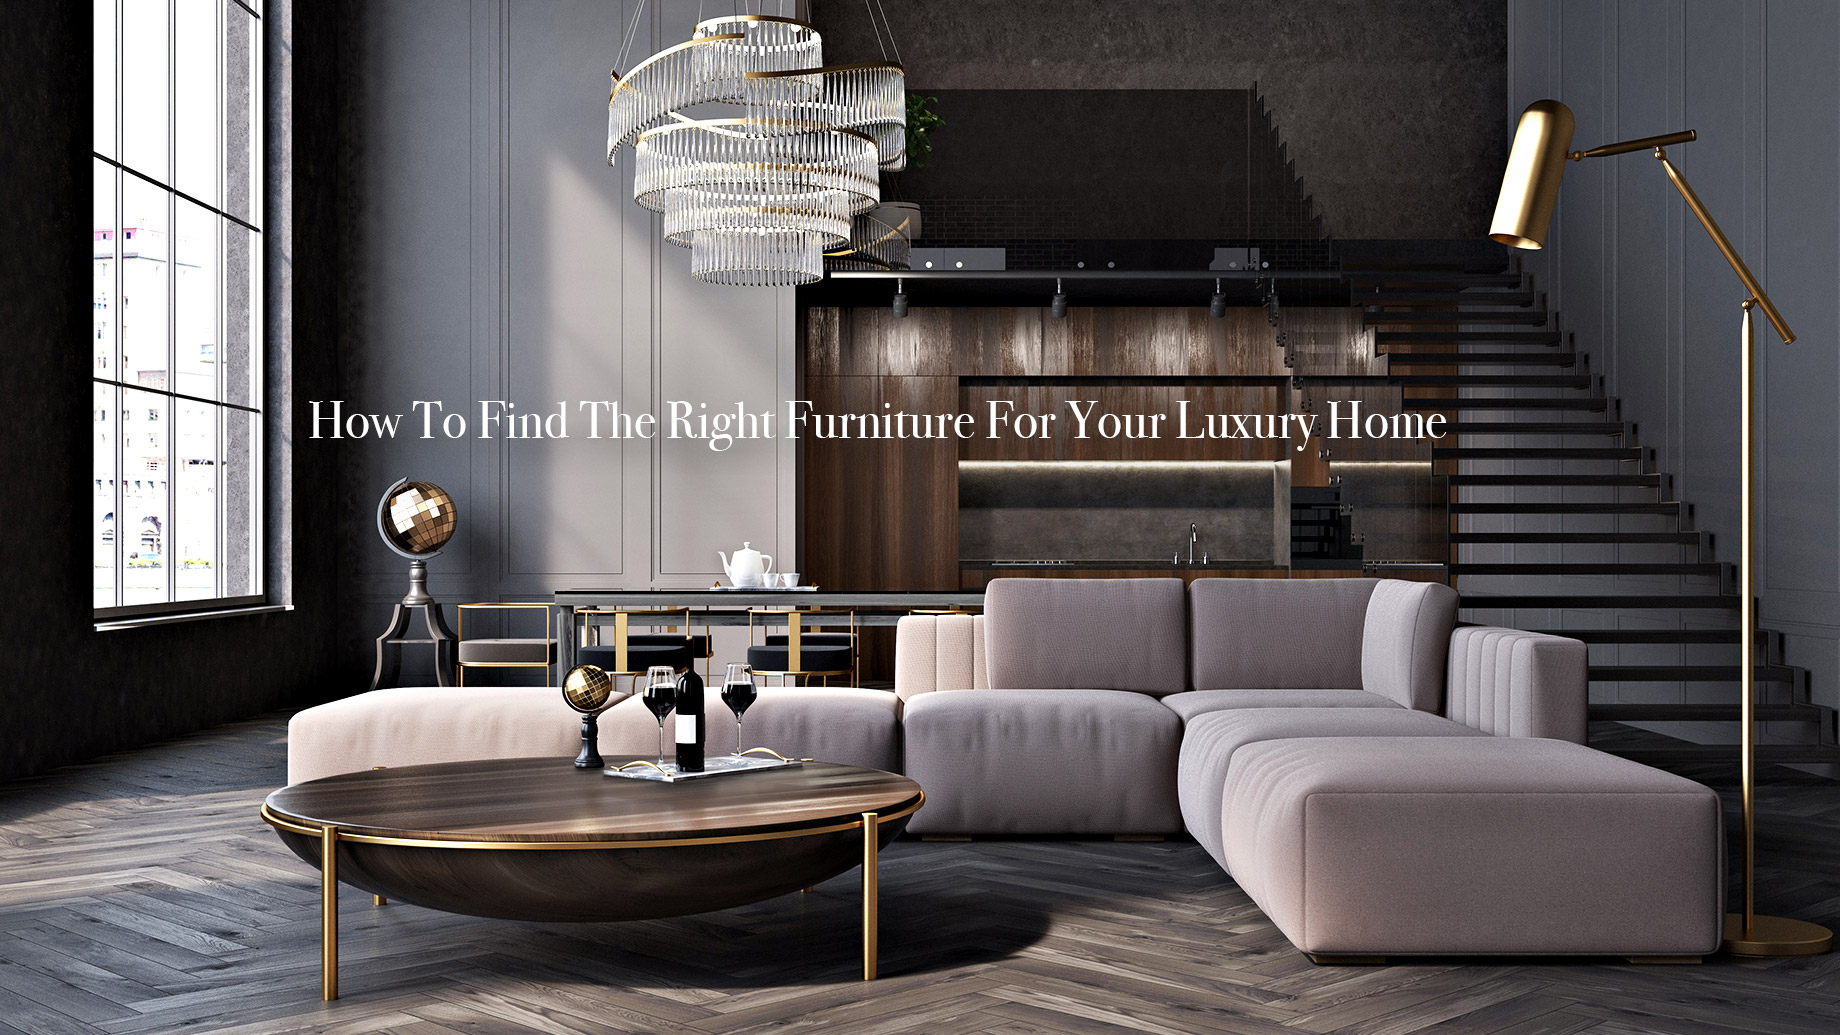 How To Find The Right Furniture For Your Luxury Home